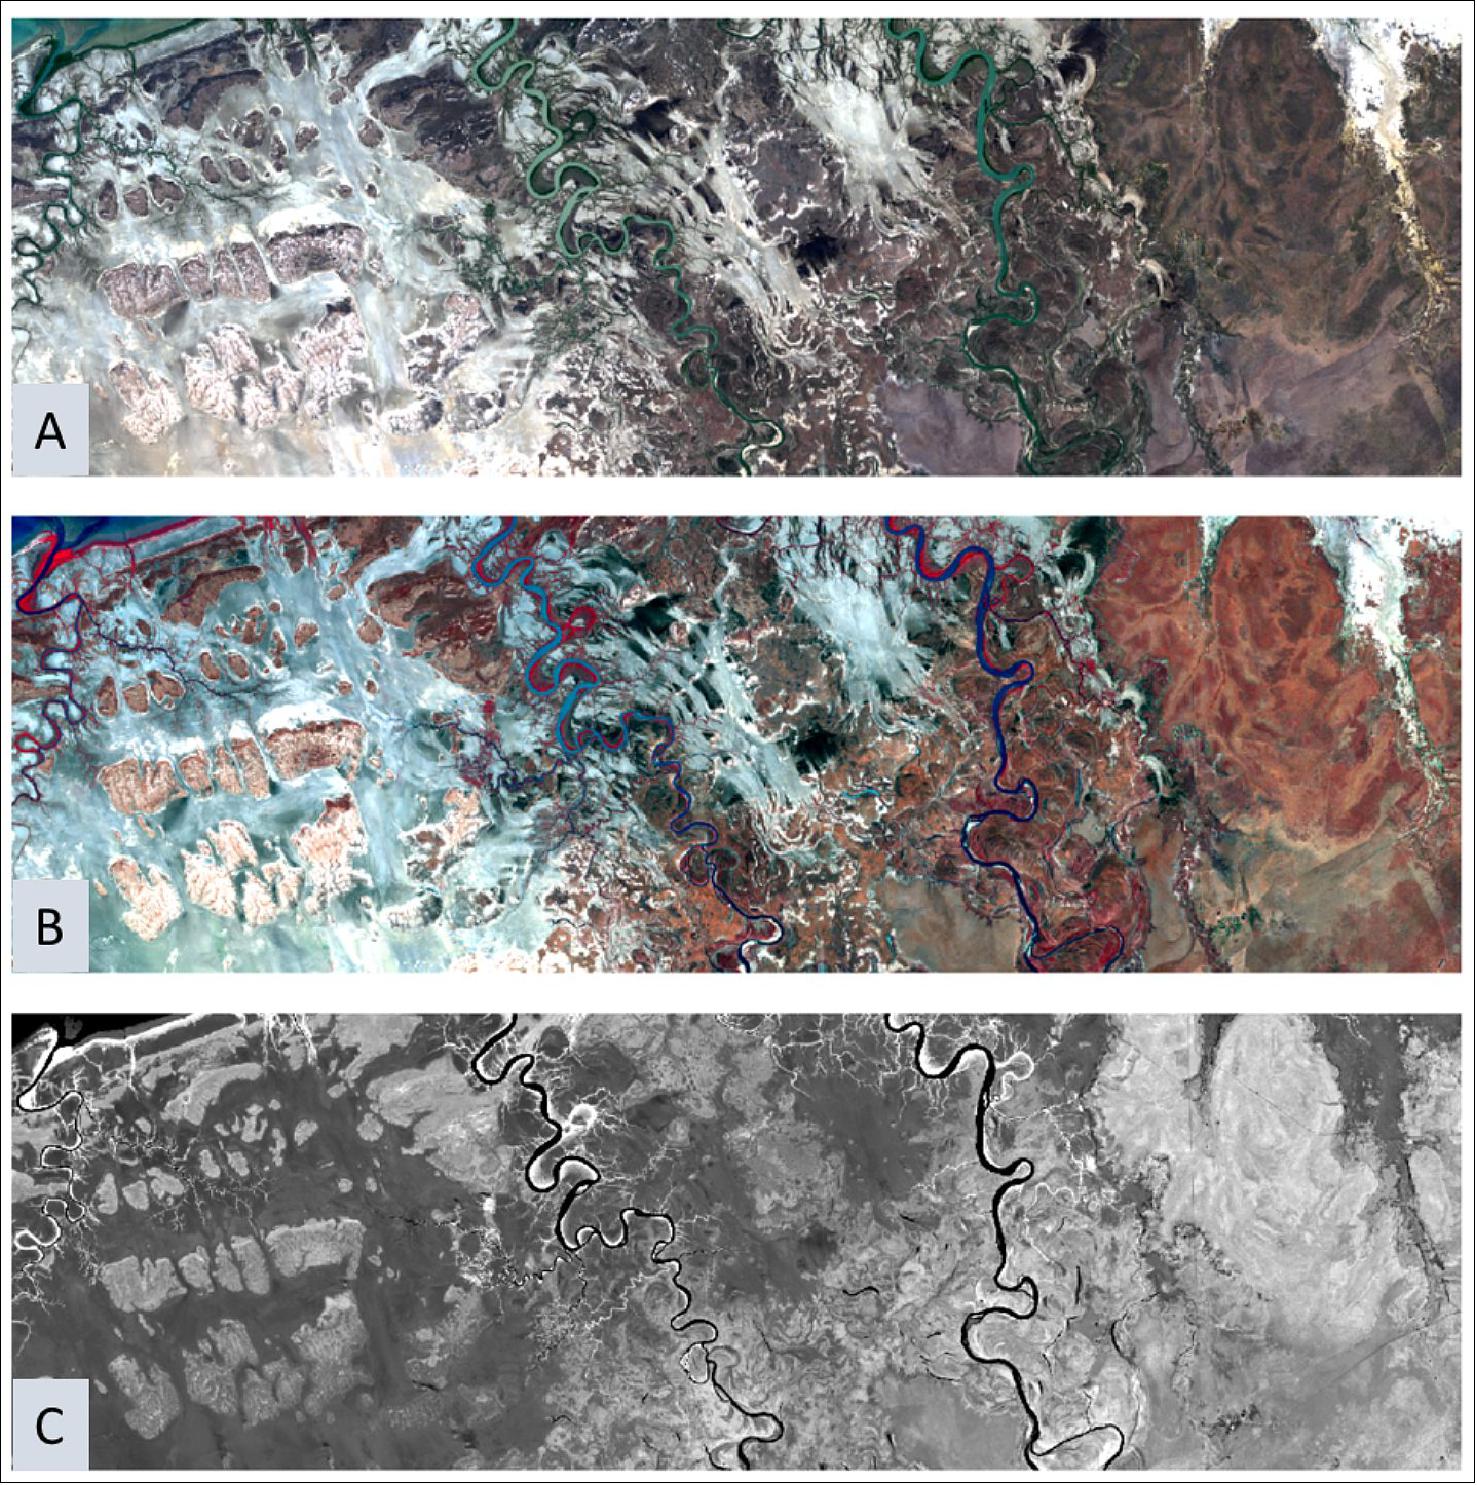 Figure 15: 25 August, 2019 00:41:18 UT Georegistered Landsat-8 data of the coast of Northern Australia. A) Red Green Blue, B Color infrared, C) NDVI. These data, taken 6 days later, were the next available cloudfree Landsat-8 imagery of the region imaged on 19 August by the R3 CubeSat. The data were taken 5 hours and 15 minutes earlier in the day as well during the usual mid-morning sun-synch. Landsat-8 overpass time (image credit: Aerospace)